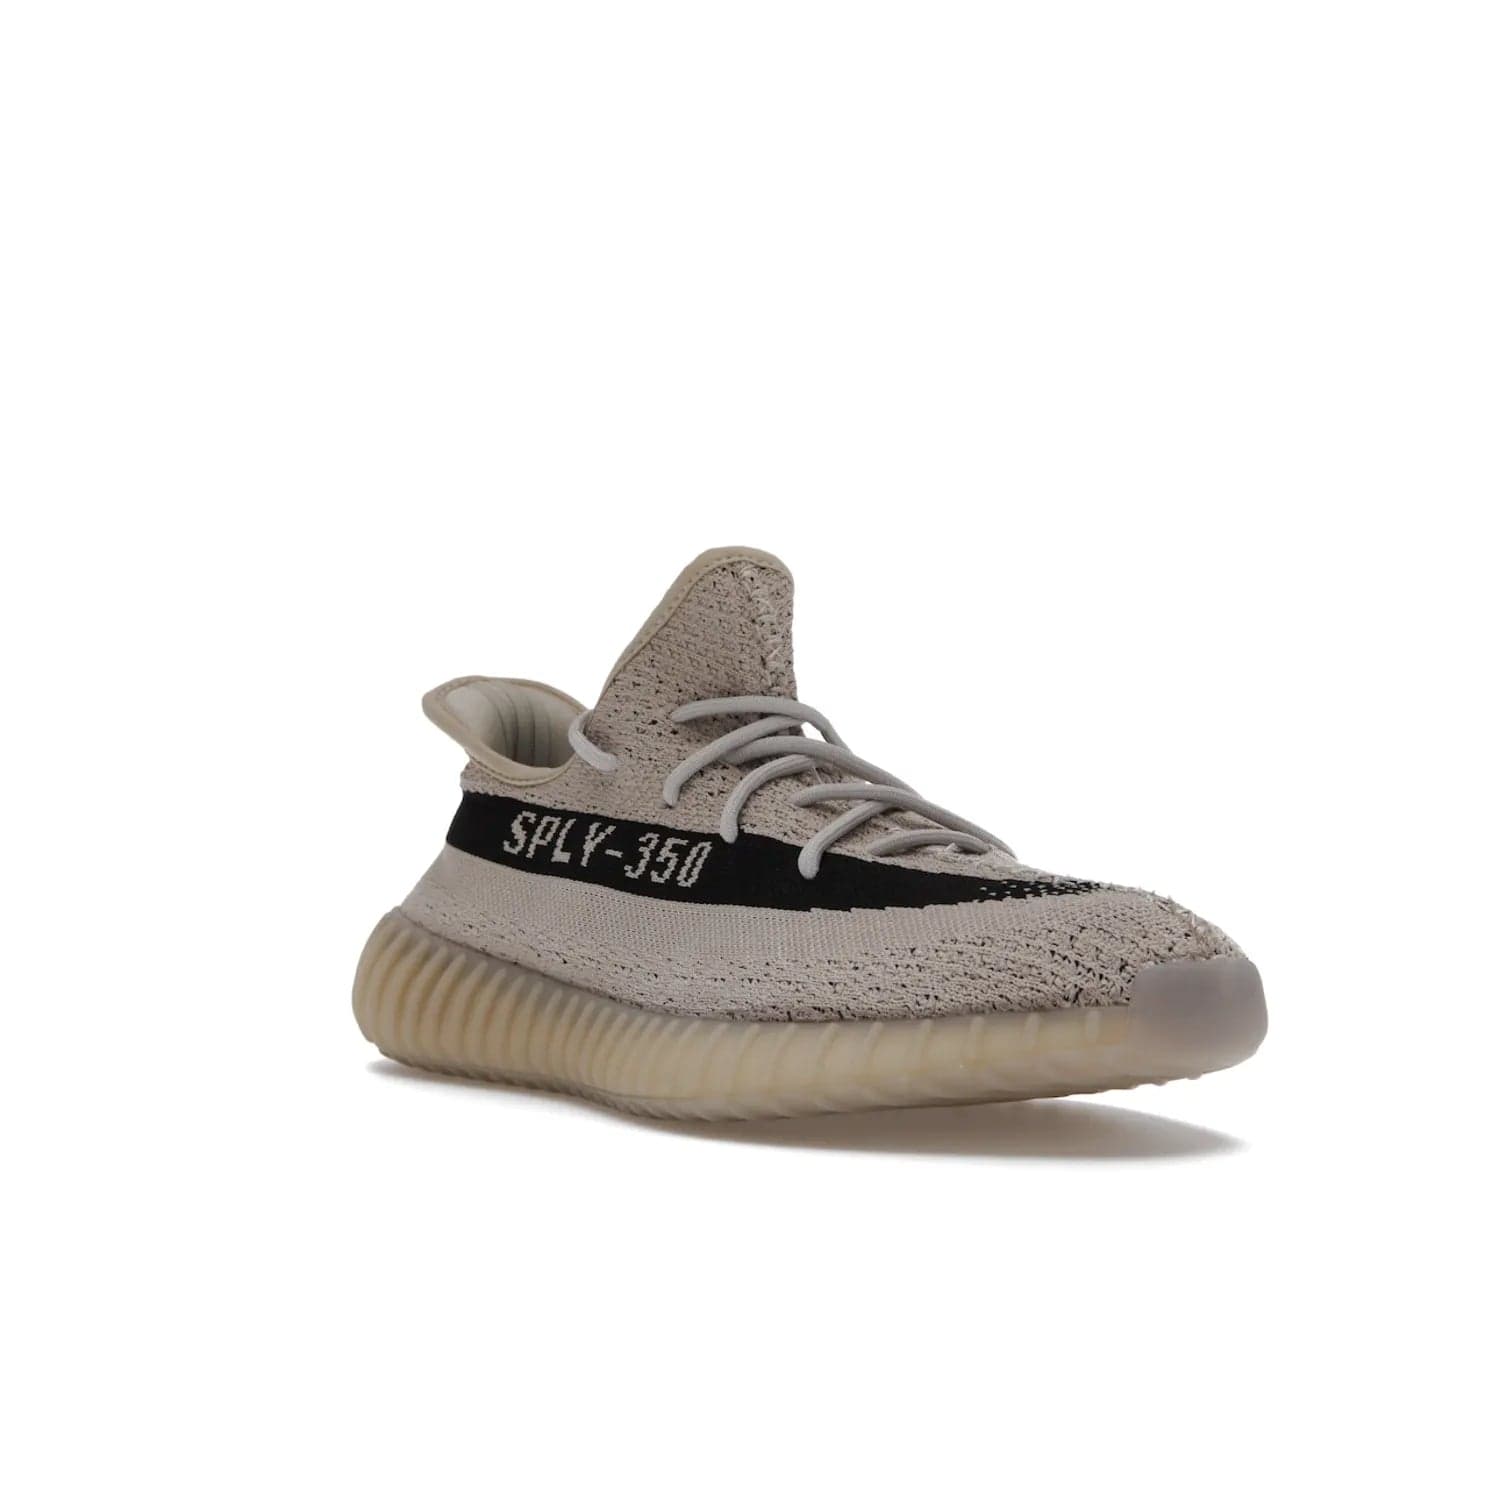 adidas Yeezy Boost 350 V2 Slate - Image 6 - Only at www.BallersClubKickz.com - Adidas Yeezy Boost 350 V2 Slate Core Black Slate featuring Primeknit upper, Boost midsole and semi-translucent TPU cage. Launched on 3/9/2022, retailed at $230.